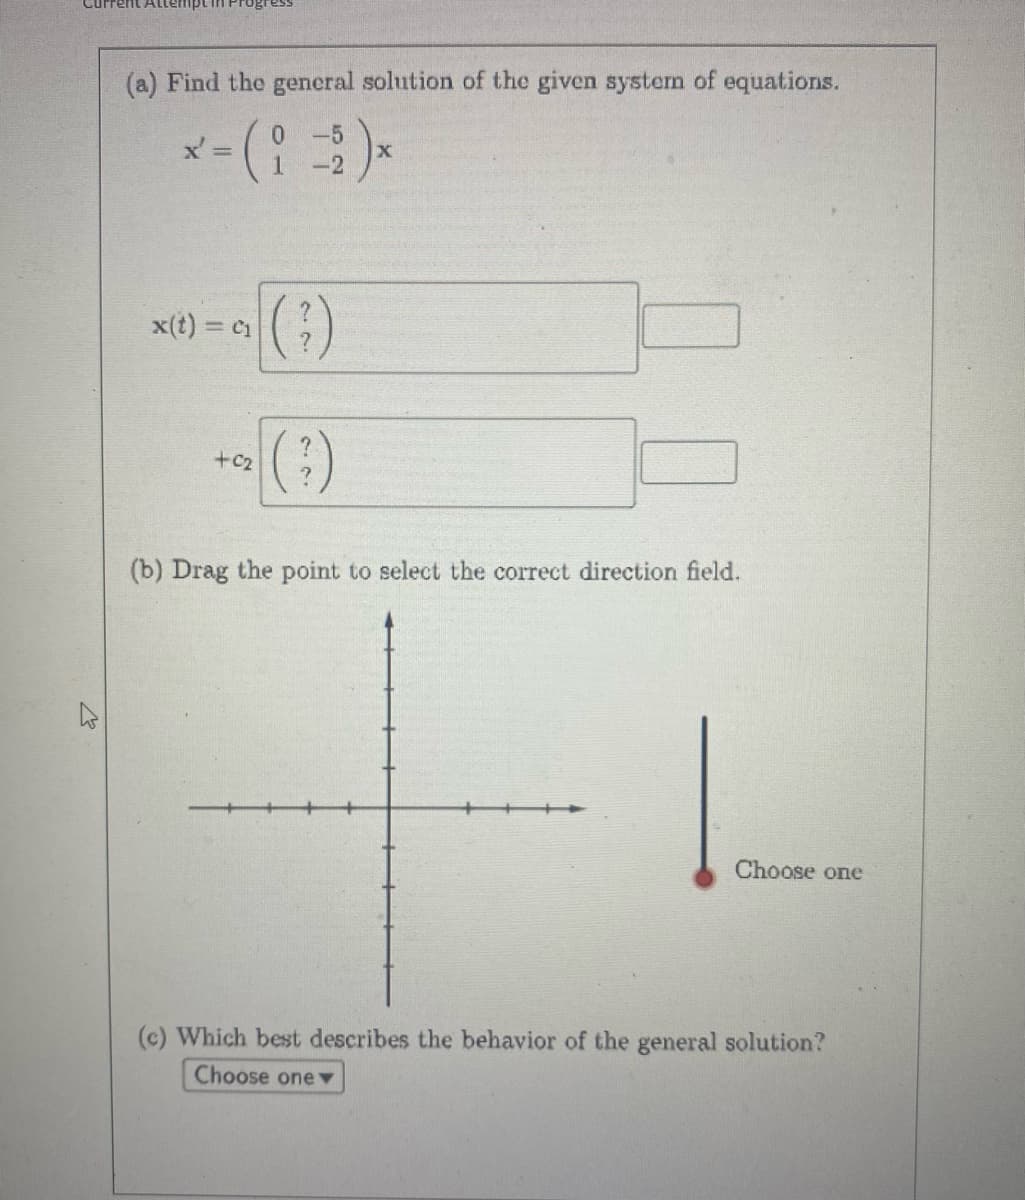 (a) Find the general solution of the given system of equations.
x' =
x(t) = C₁
+02
(?)
(3)
X
(b) Drag the point to select the correct direction field.
Choose one
(c) Which best describes the behavior of the general solution?
Choose one